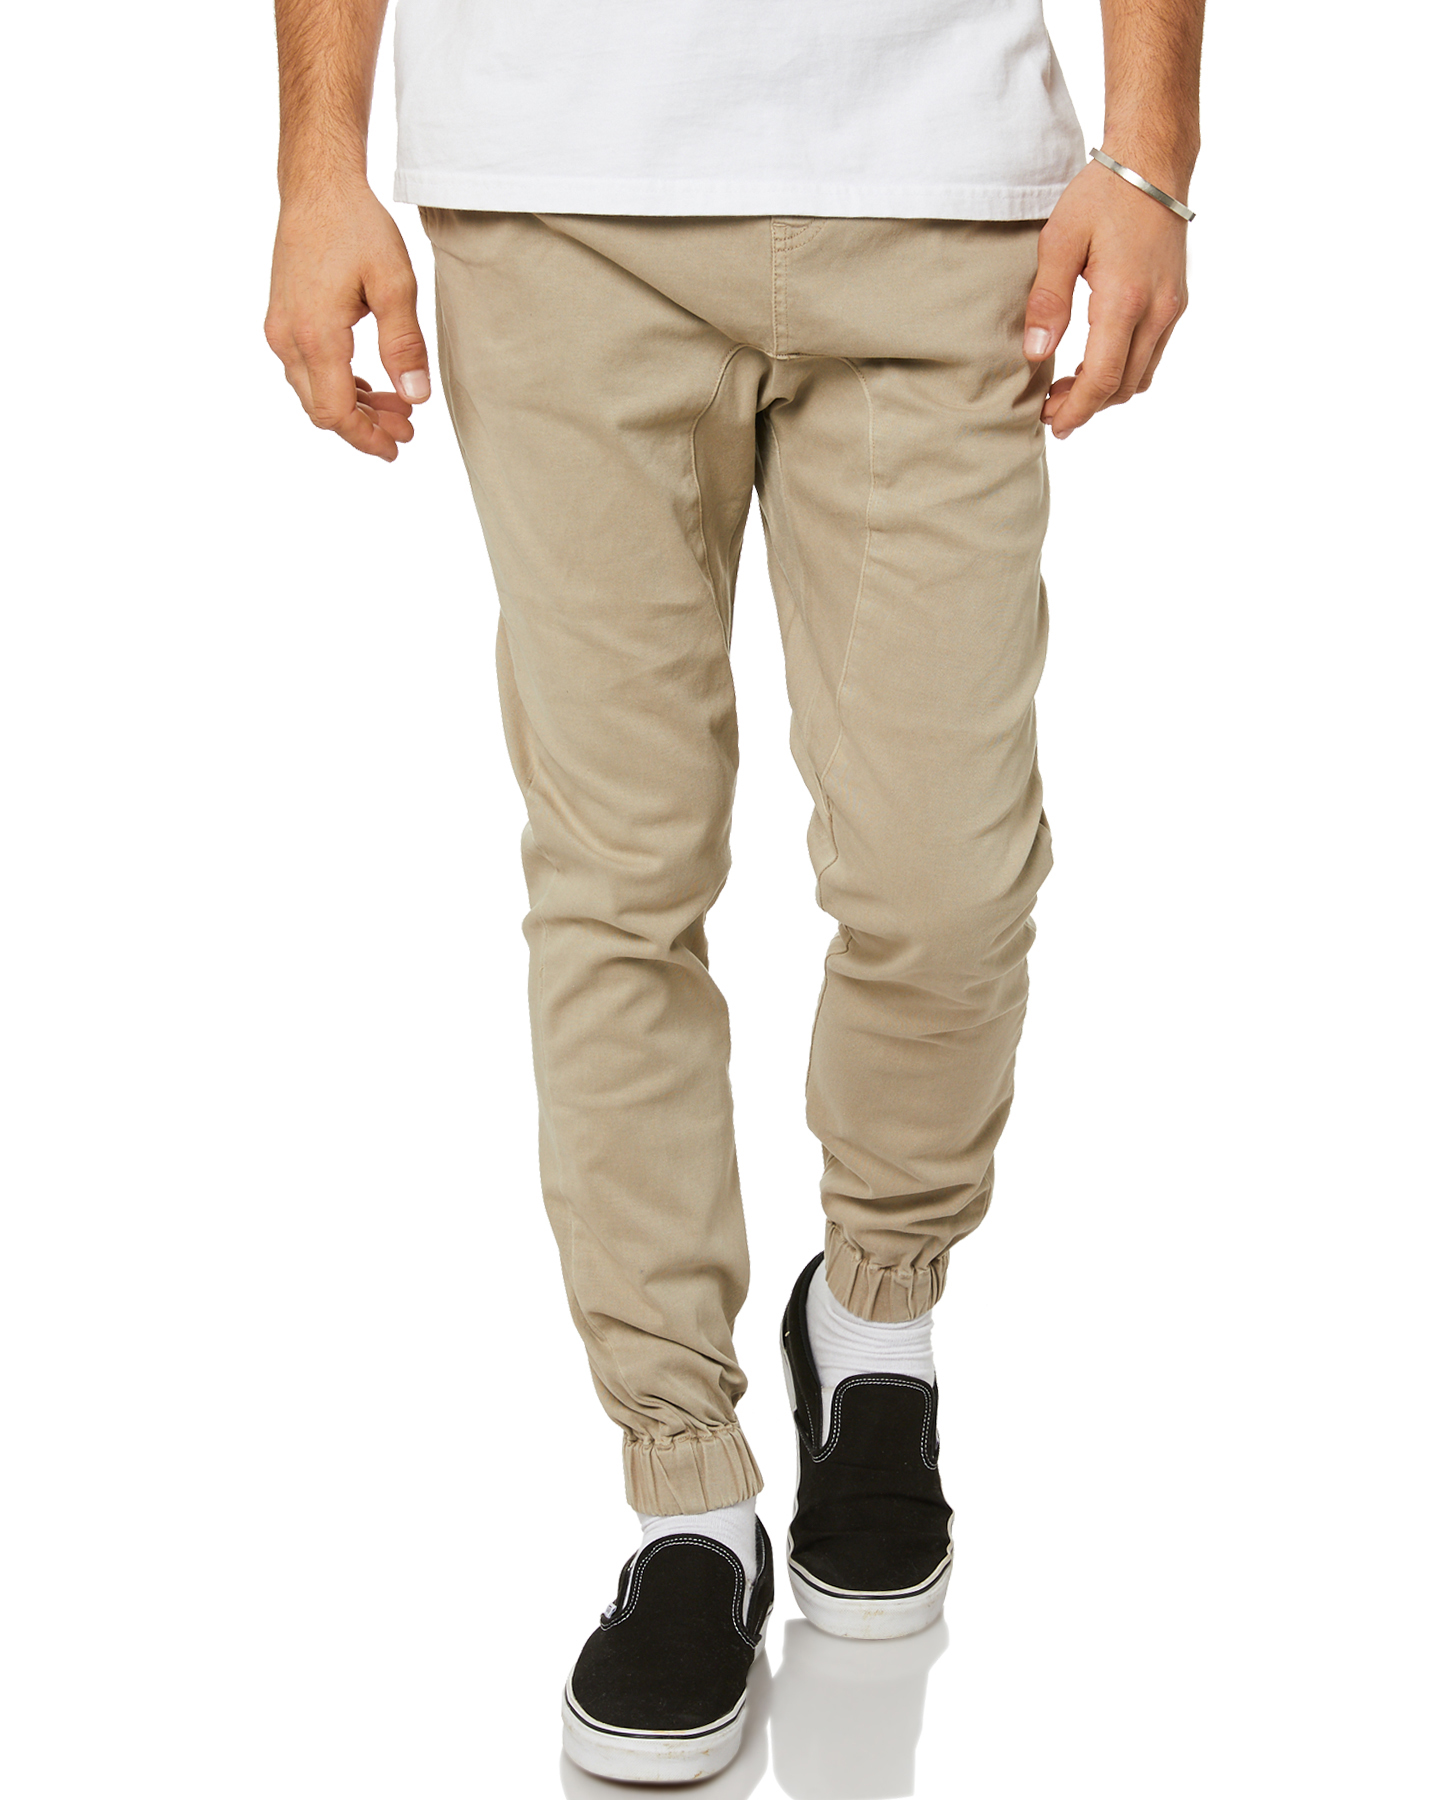 St Goliath Ultra Mens Pant - Brown | SurfStitch